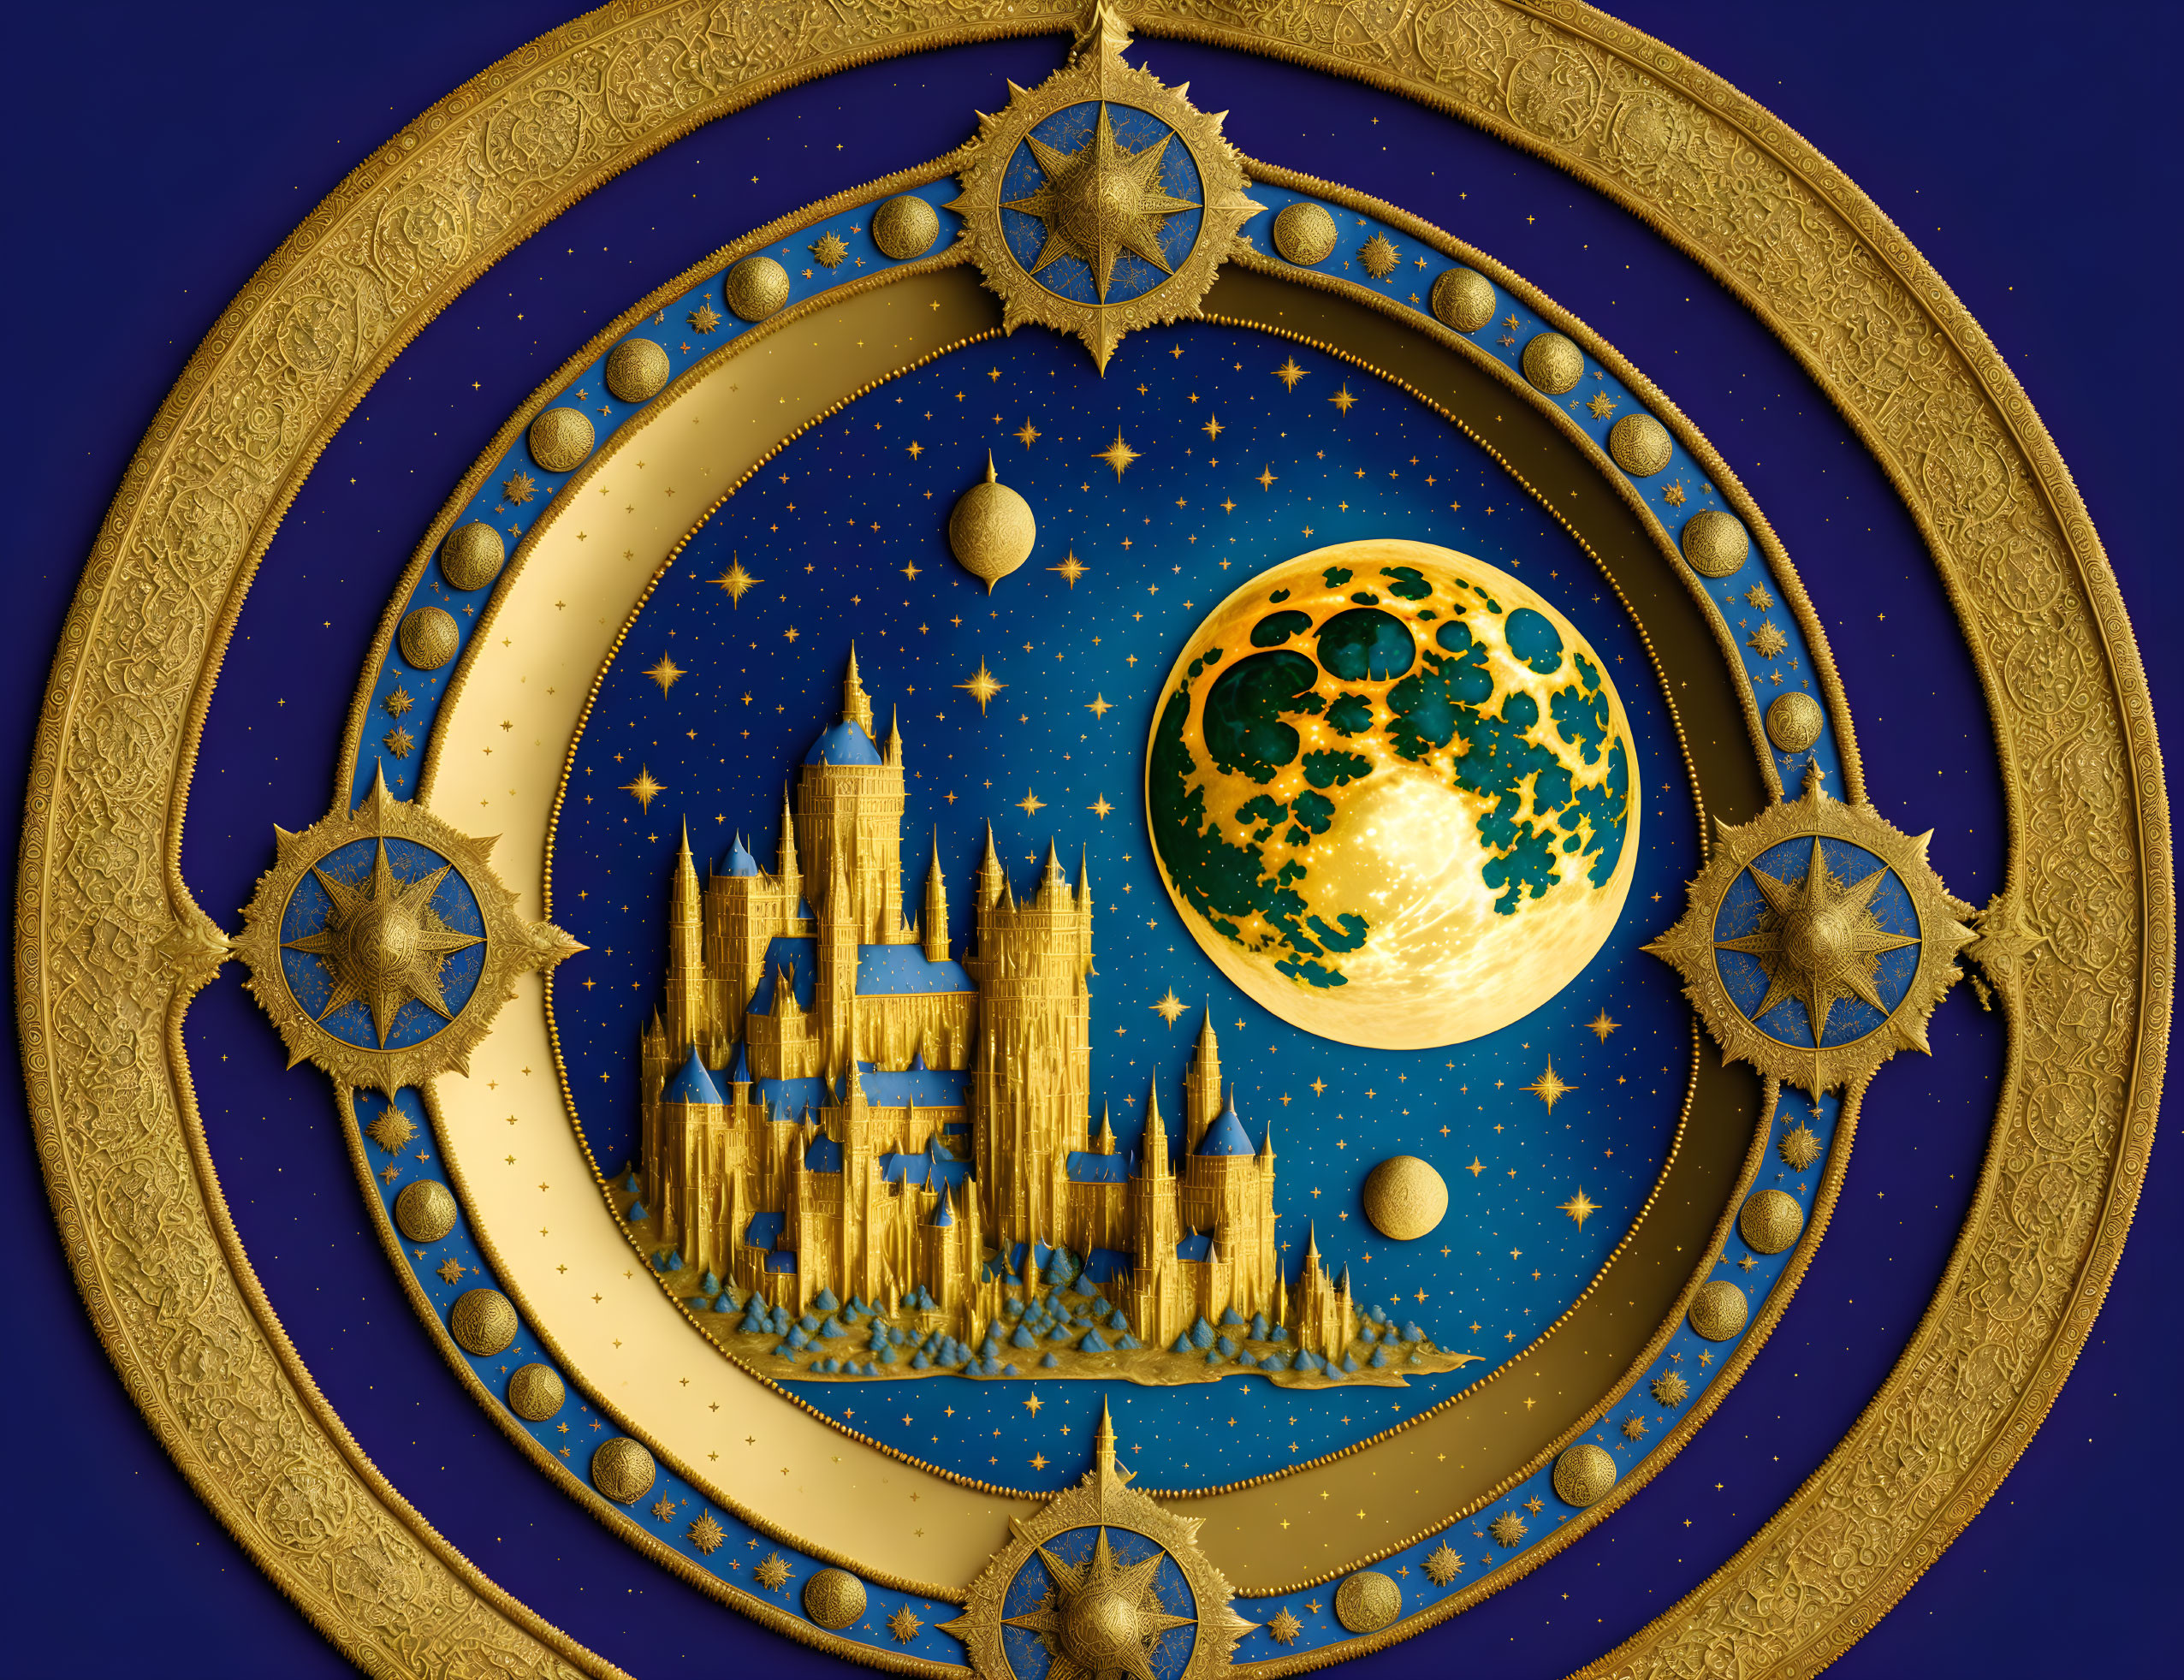 Fantasy castle in celestial frame with stars and moons on blue background